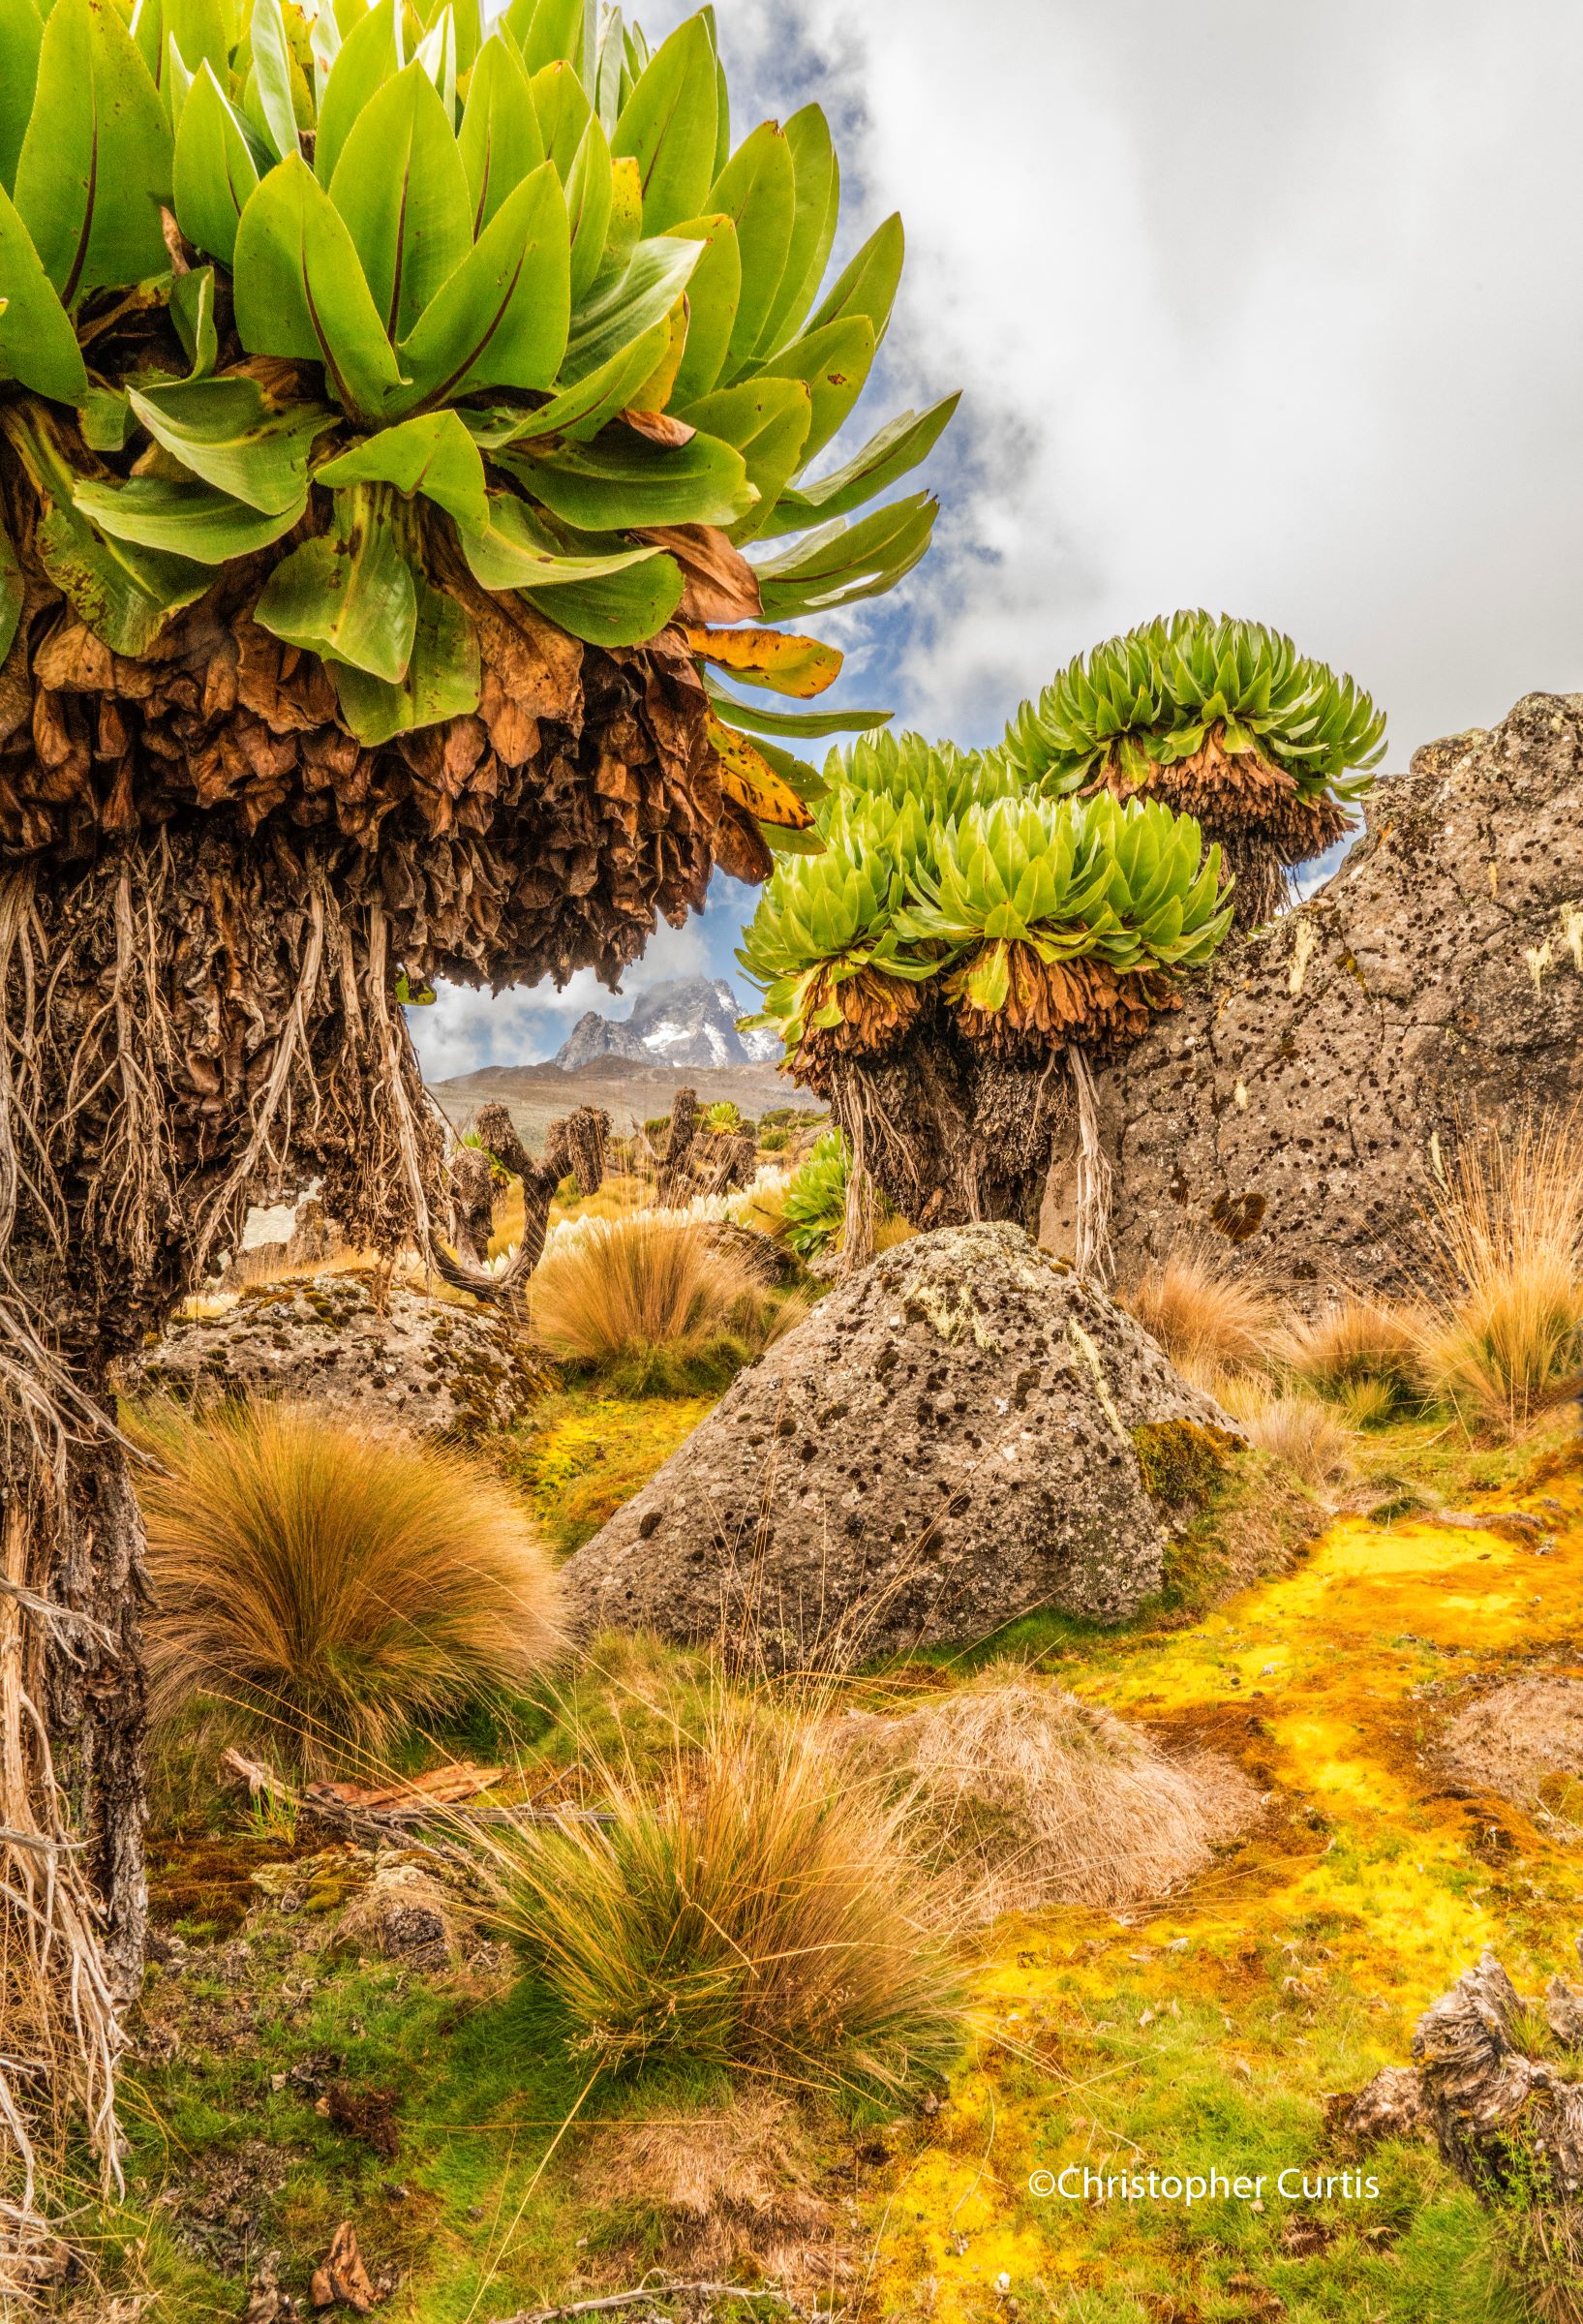 Mount Kenya with Giant Groundsels, Kenya, photography by Christopher Curtis